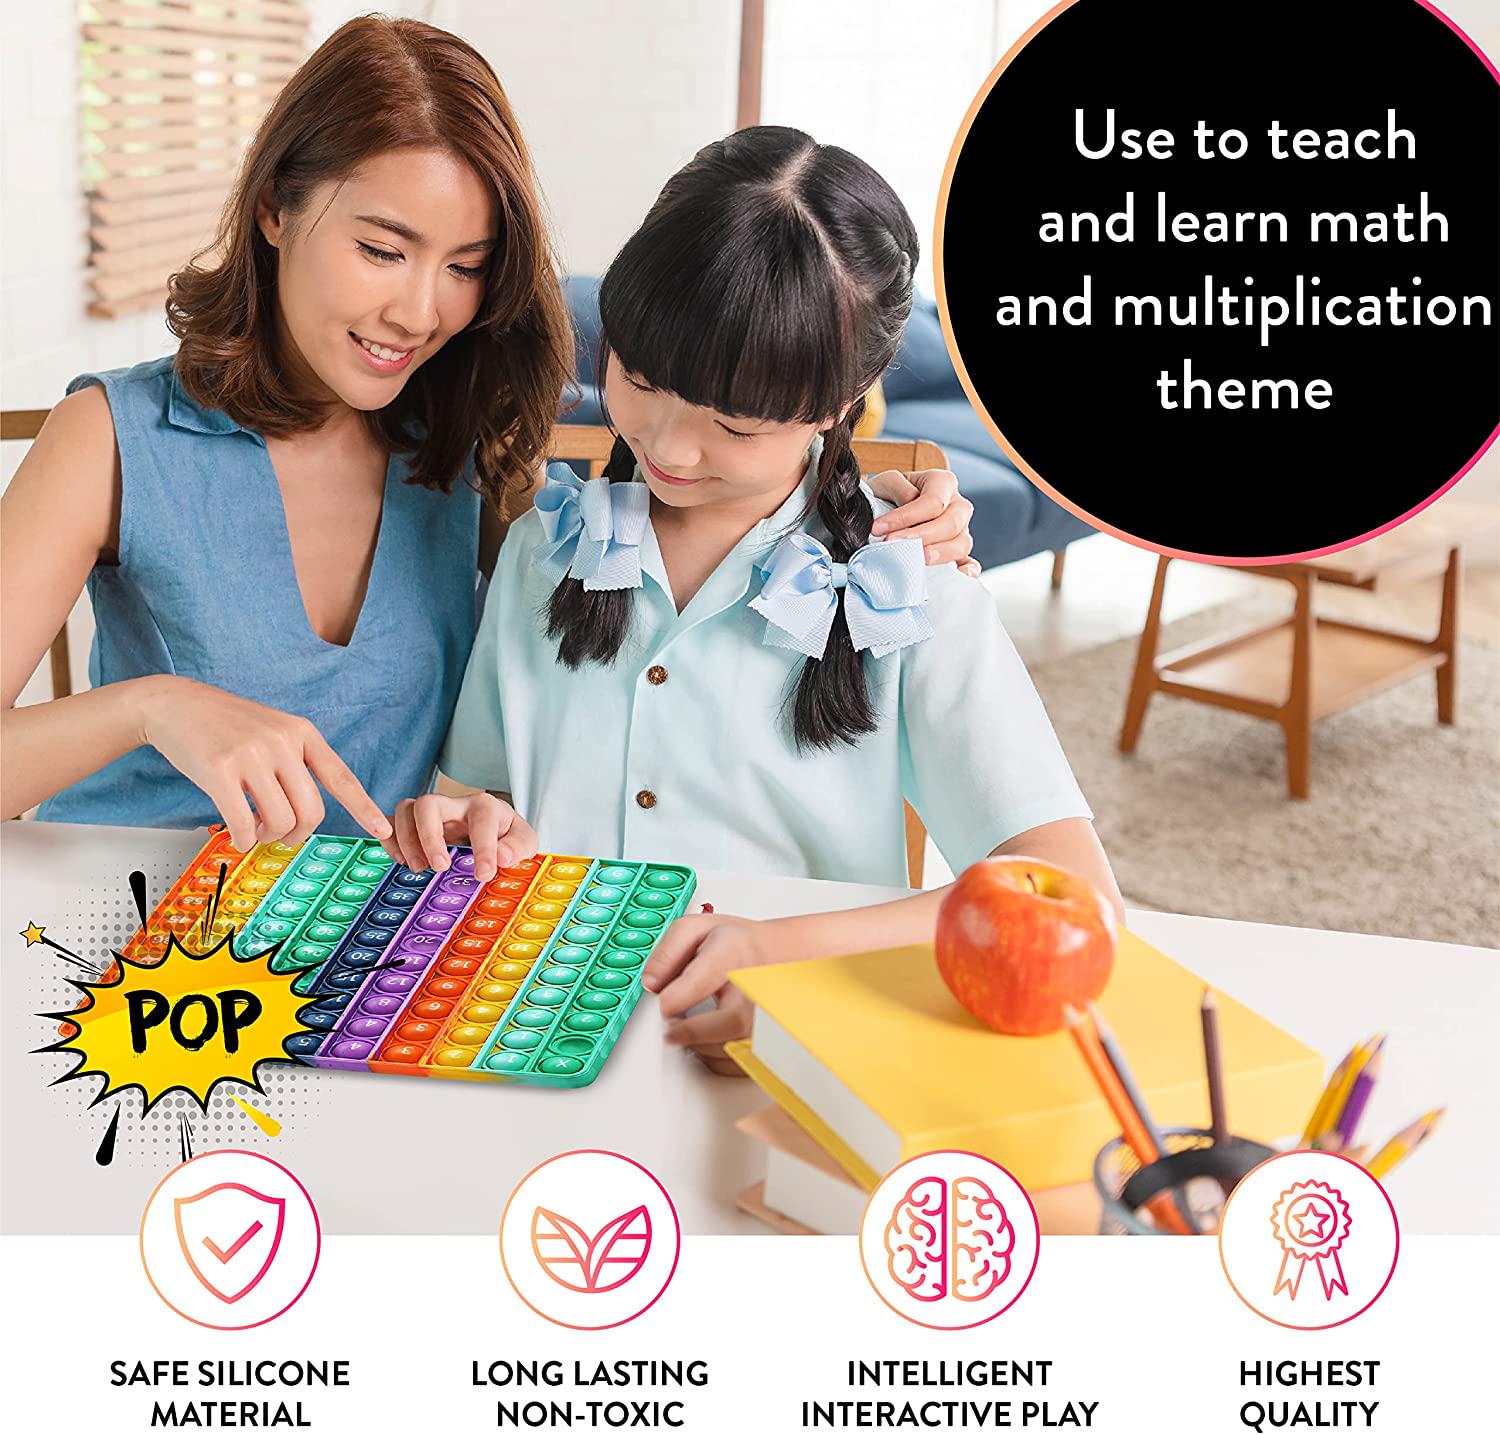 Genchi, Genchi Math Pop it Multiplication Manipulatives Education MathWizard Rainbow Fidget Sensory Toys Popper Toy Squeeze for Stress Relief Anxiety Autism ADHD ADD Adults Children (13 X 13)